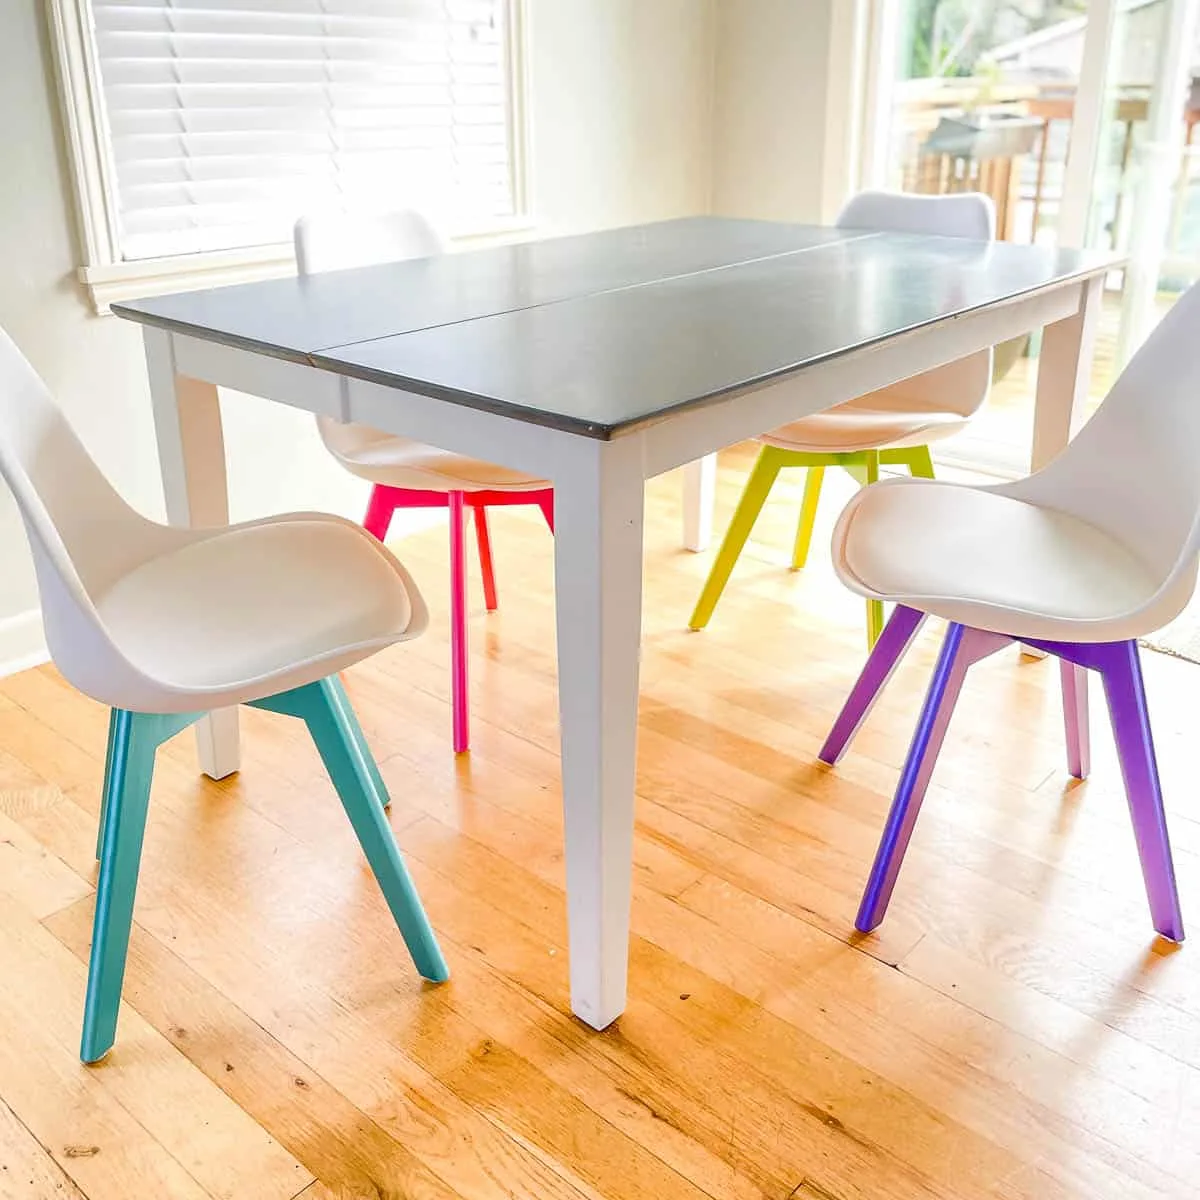 dining room chairs with metallic blue, pink, green and purple bases around a gray and white dining table